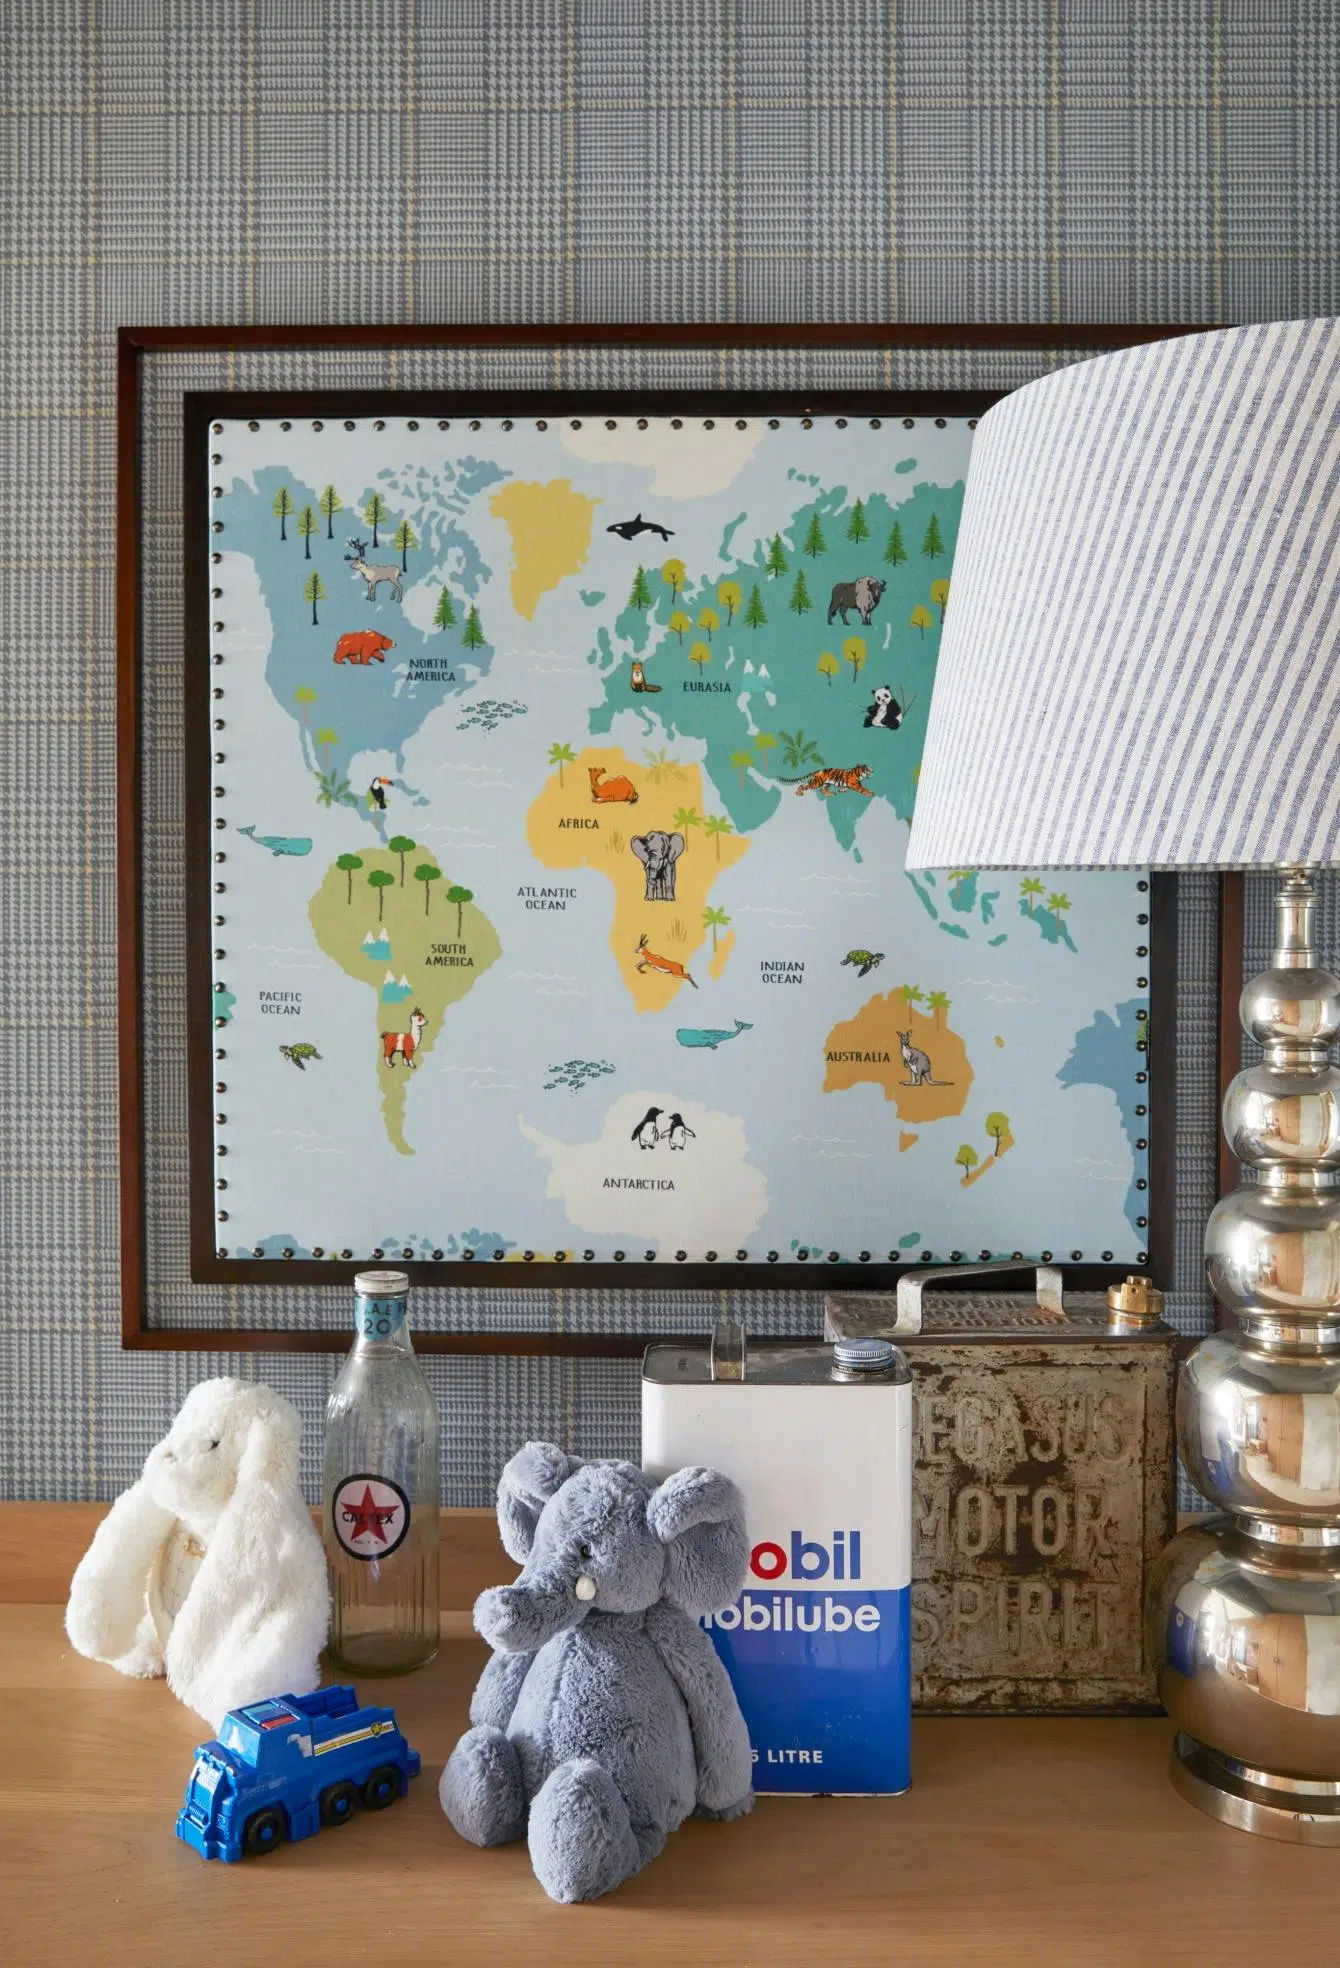 In a closeup from a child's bedroom, a plush rabbit and elephant sit next to two vintage oil cannisters and a small toy truck. A world map illustrated with animals on their native continents is framed on the wall against plaid wallpaper, and a striped lampshade sits on a metallic base.